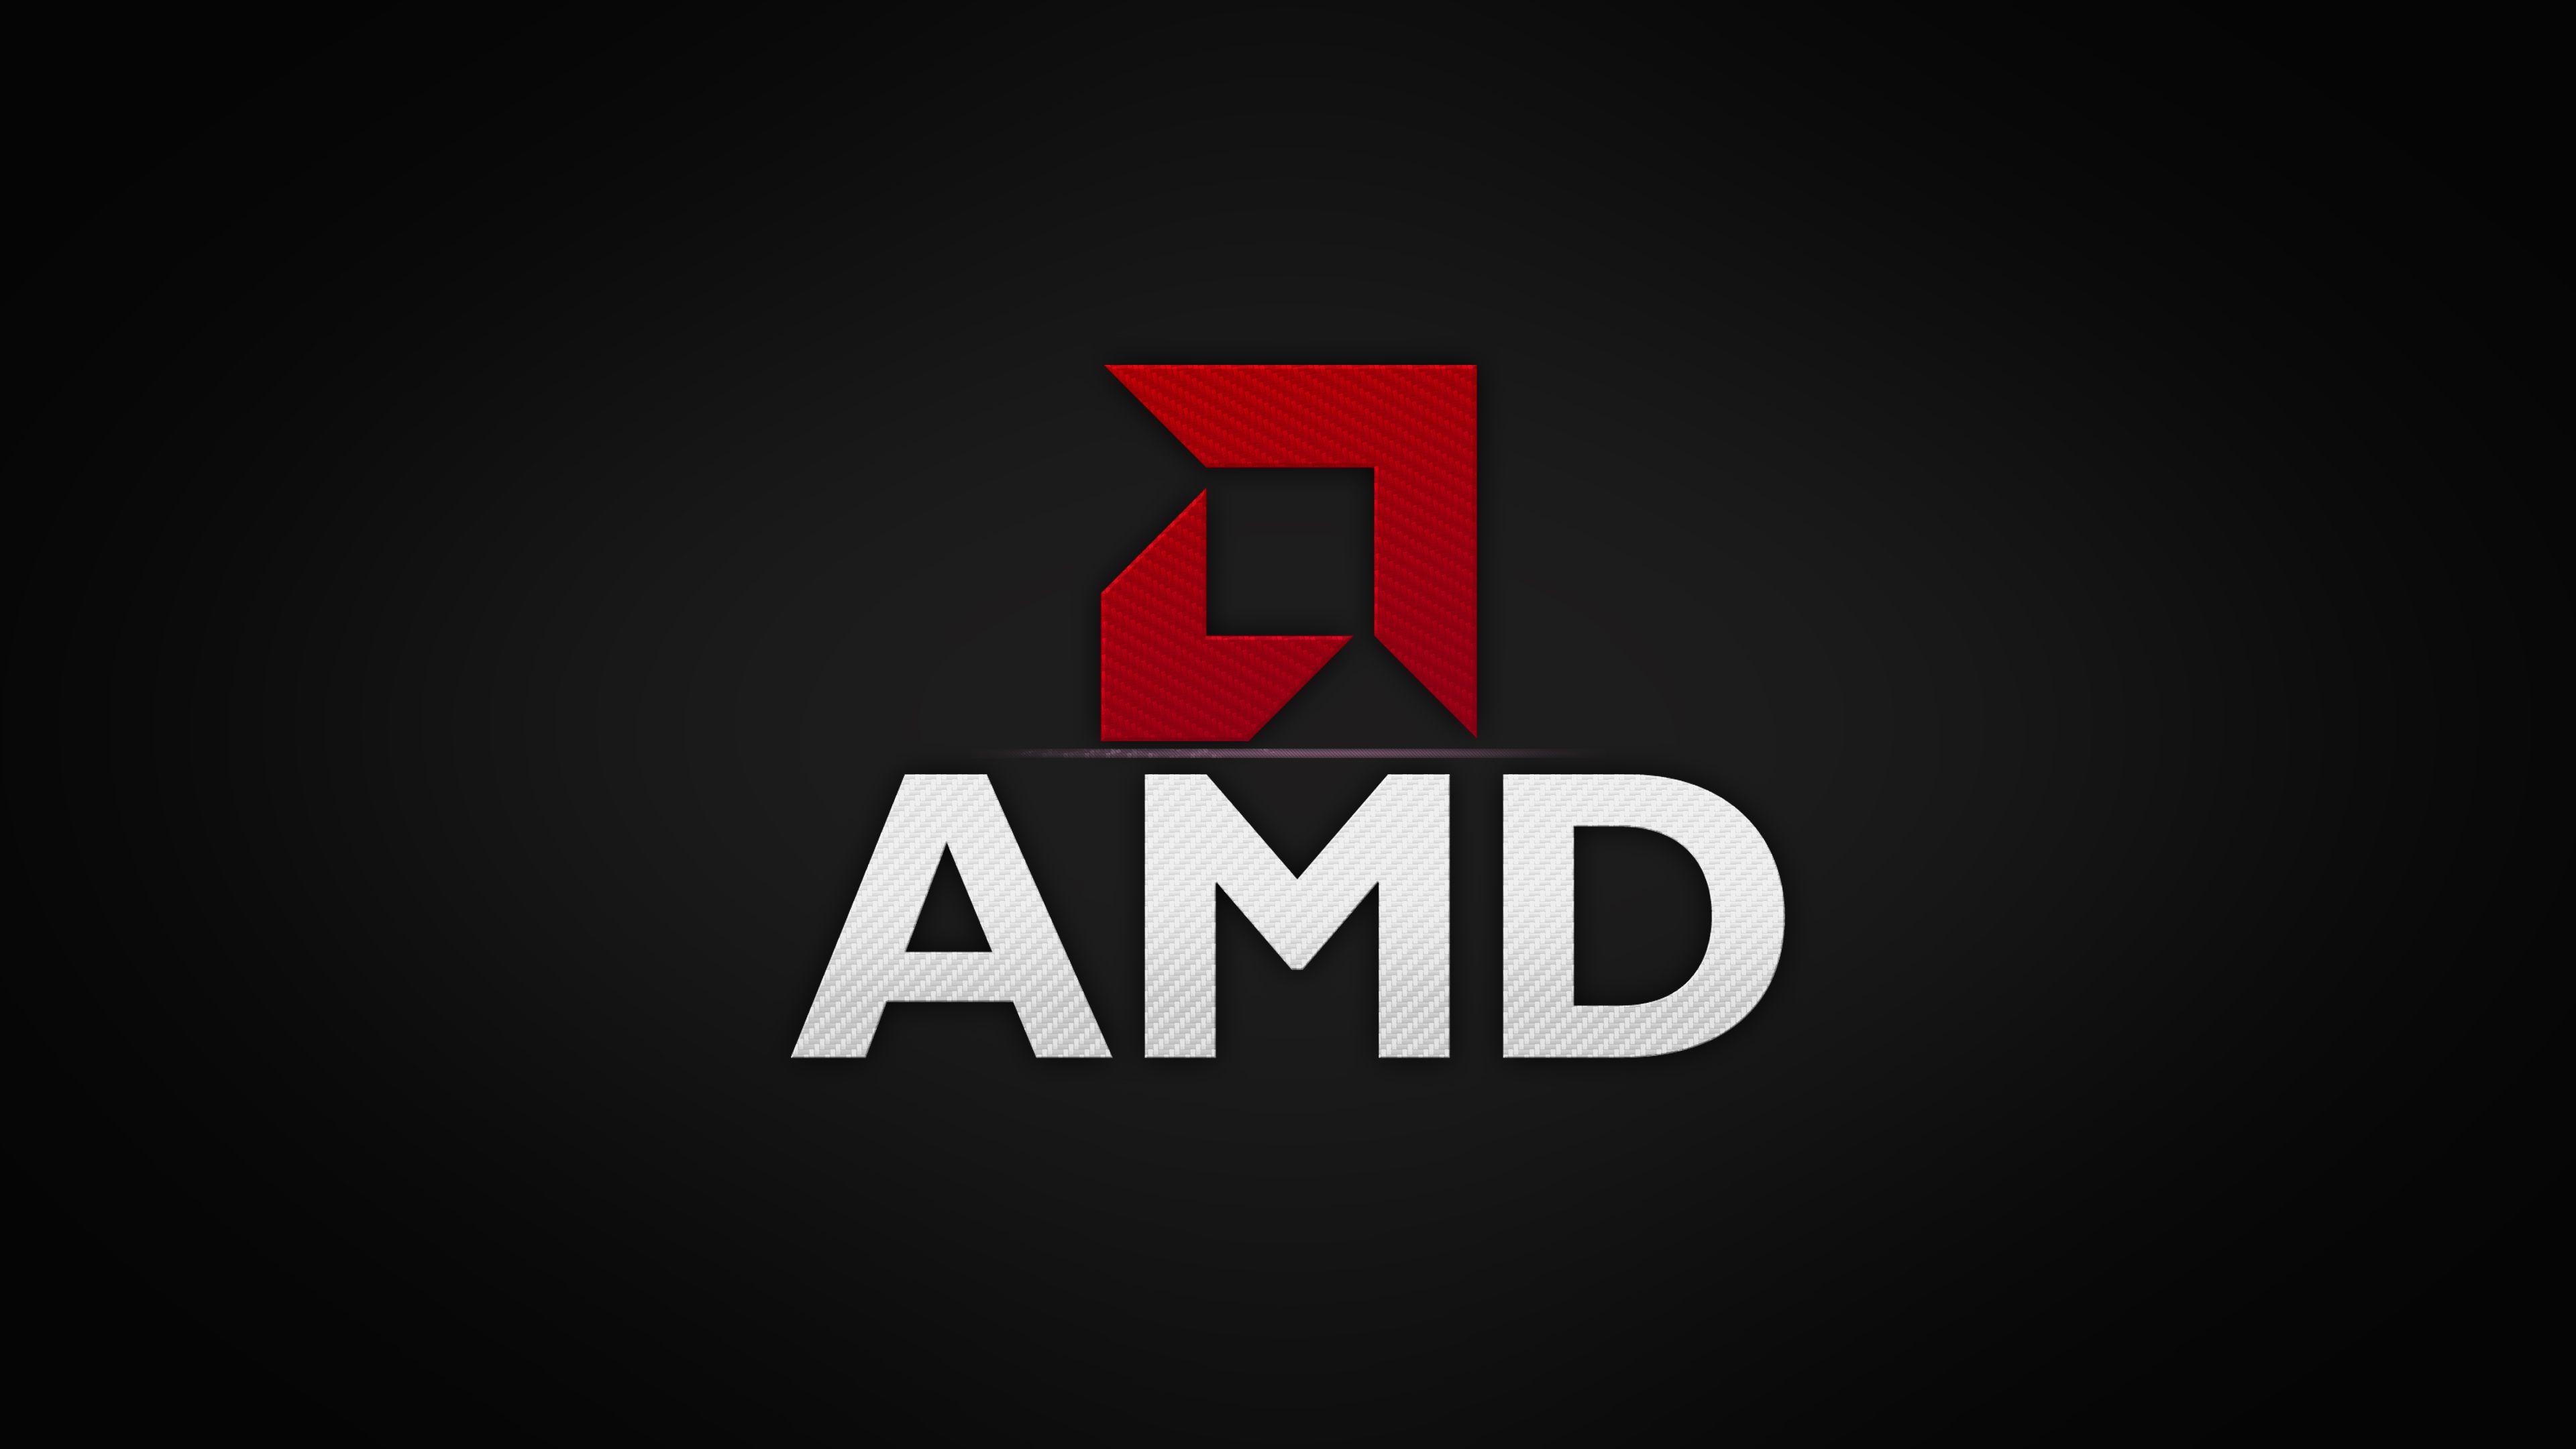 AMD 4K Logo - AMD 4k, HD Computer, 4k Wallpapers, Images, Backgrounds, Photos and ...